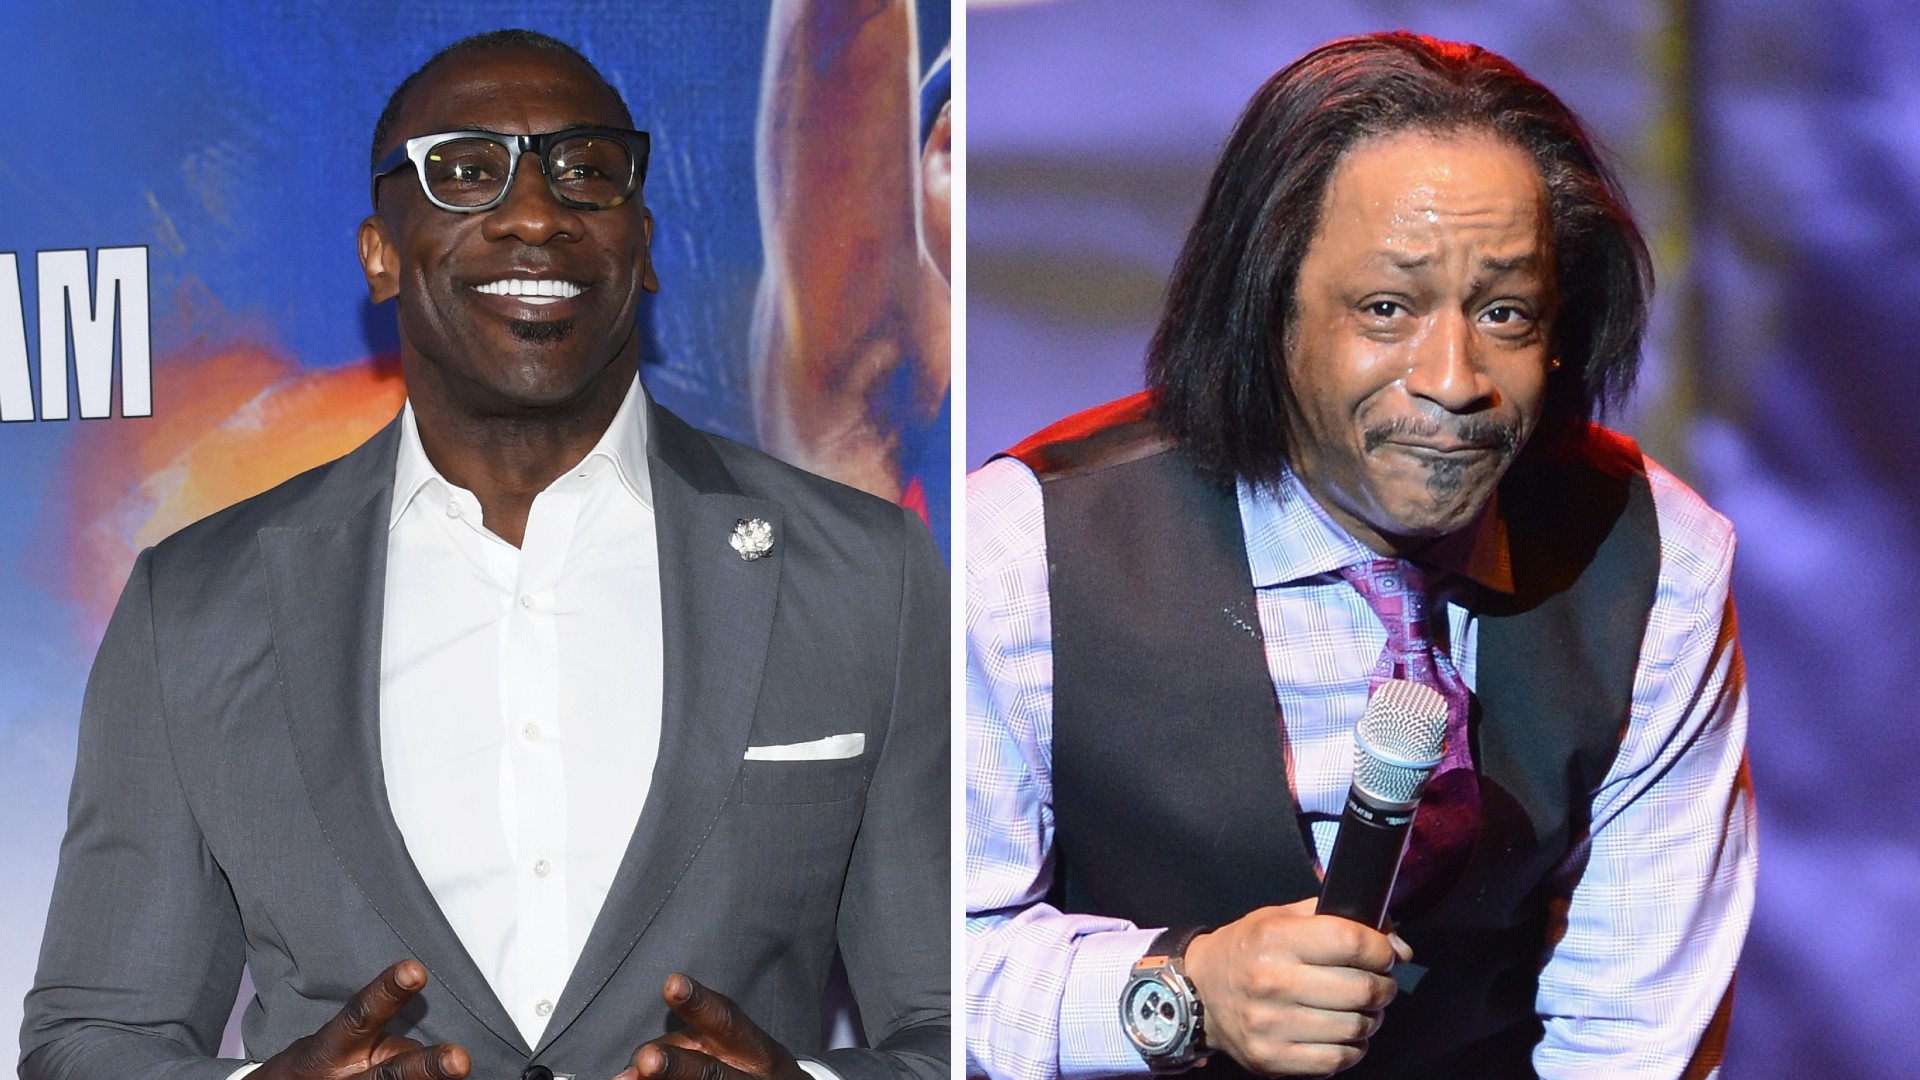 Shannon Sharpe Addresses Criticsm For How He Conducted Katt Williams Interview: "I Never Said I Was A Journalist"